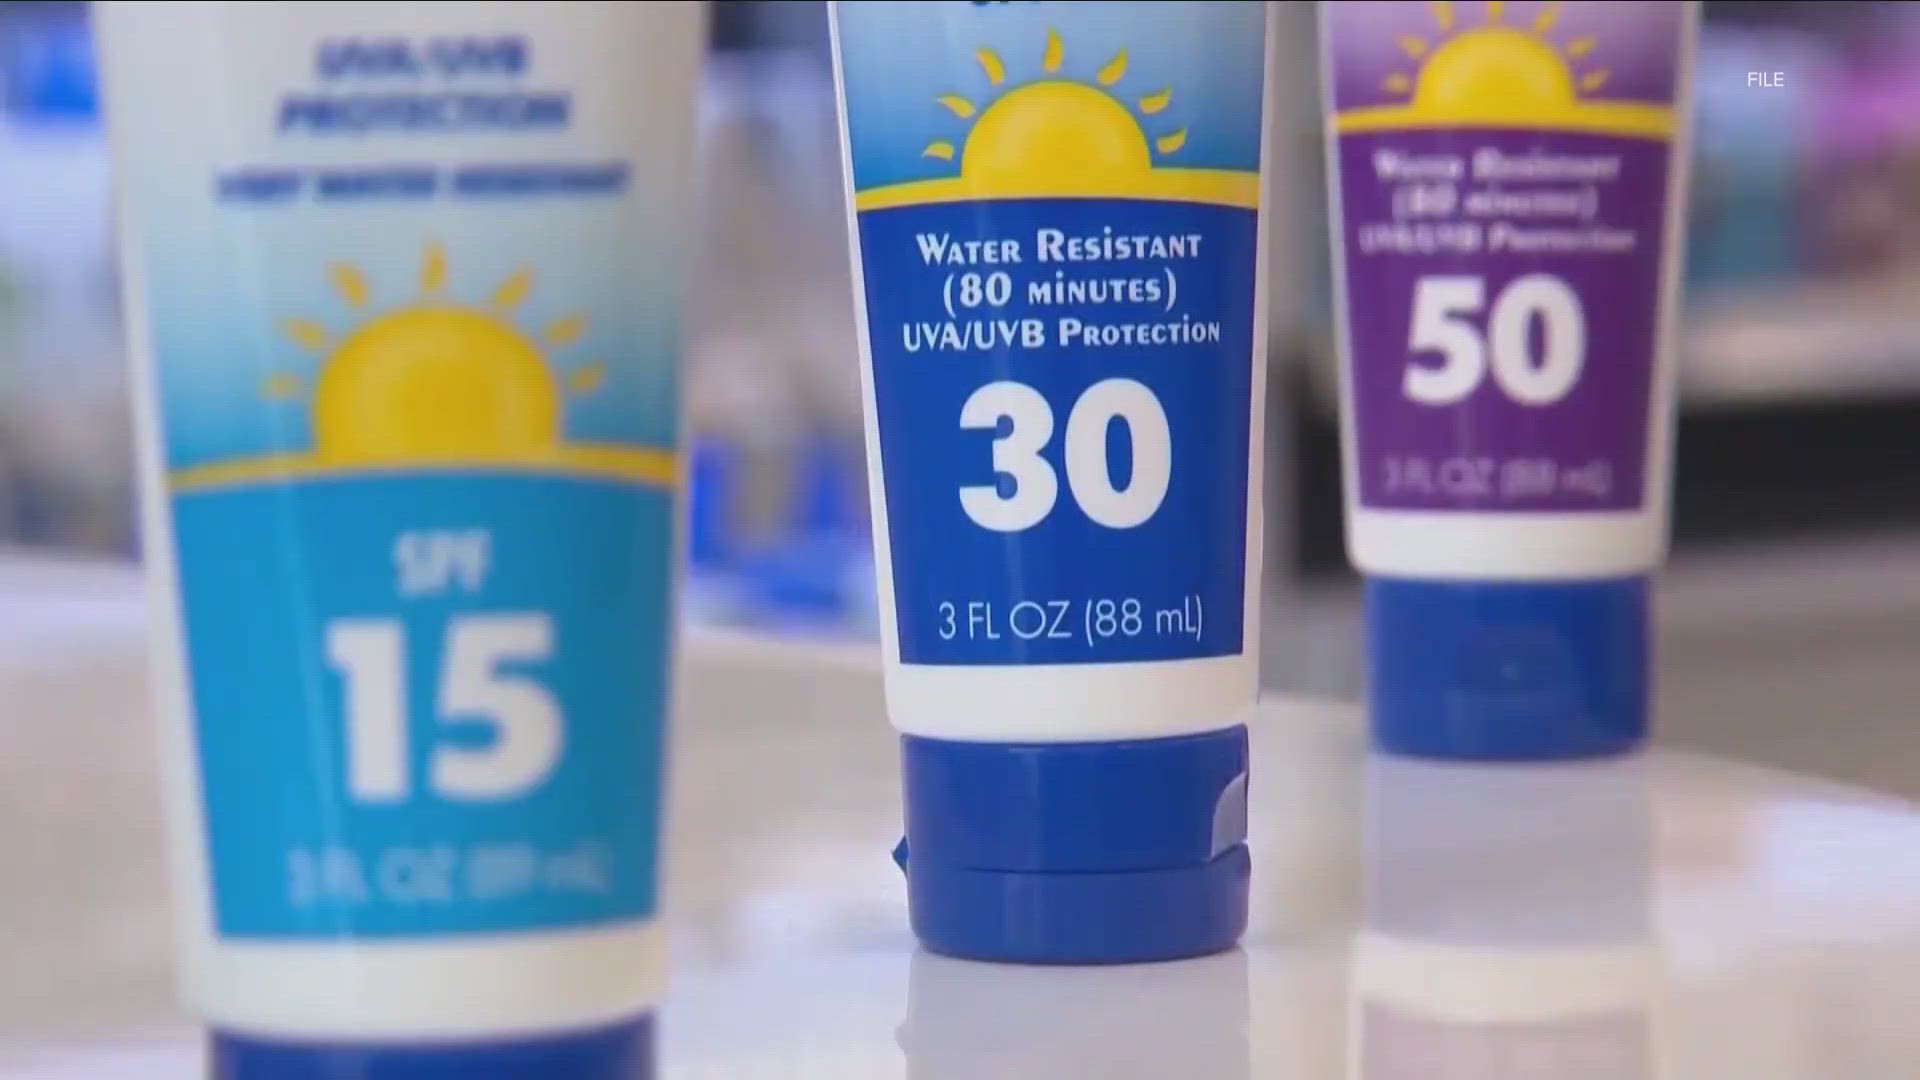 Research shows 1 in 3 Americans choose not to wear sunscreen.